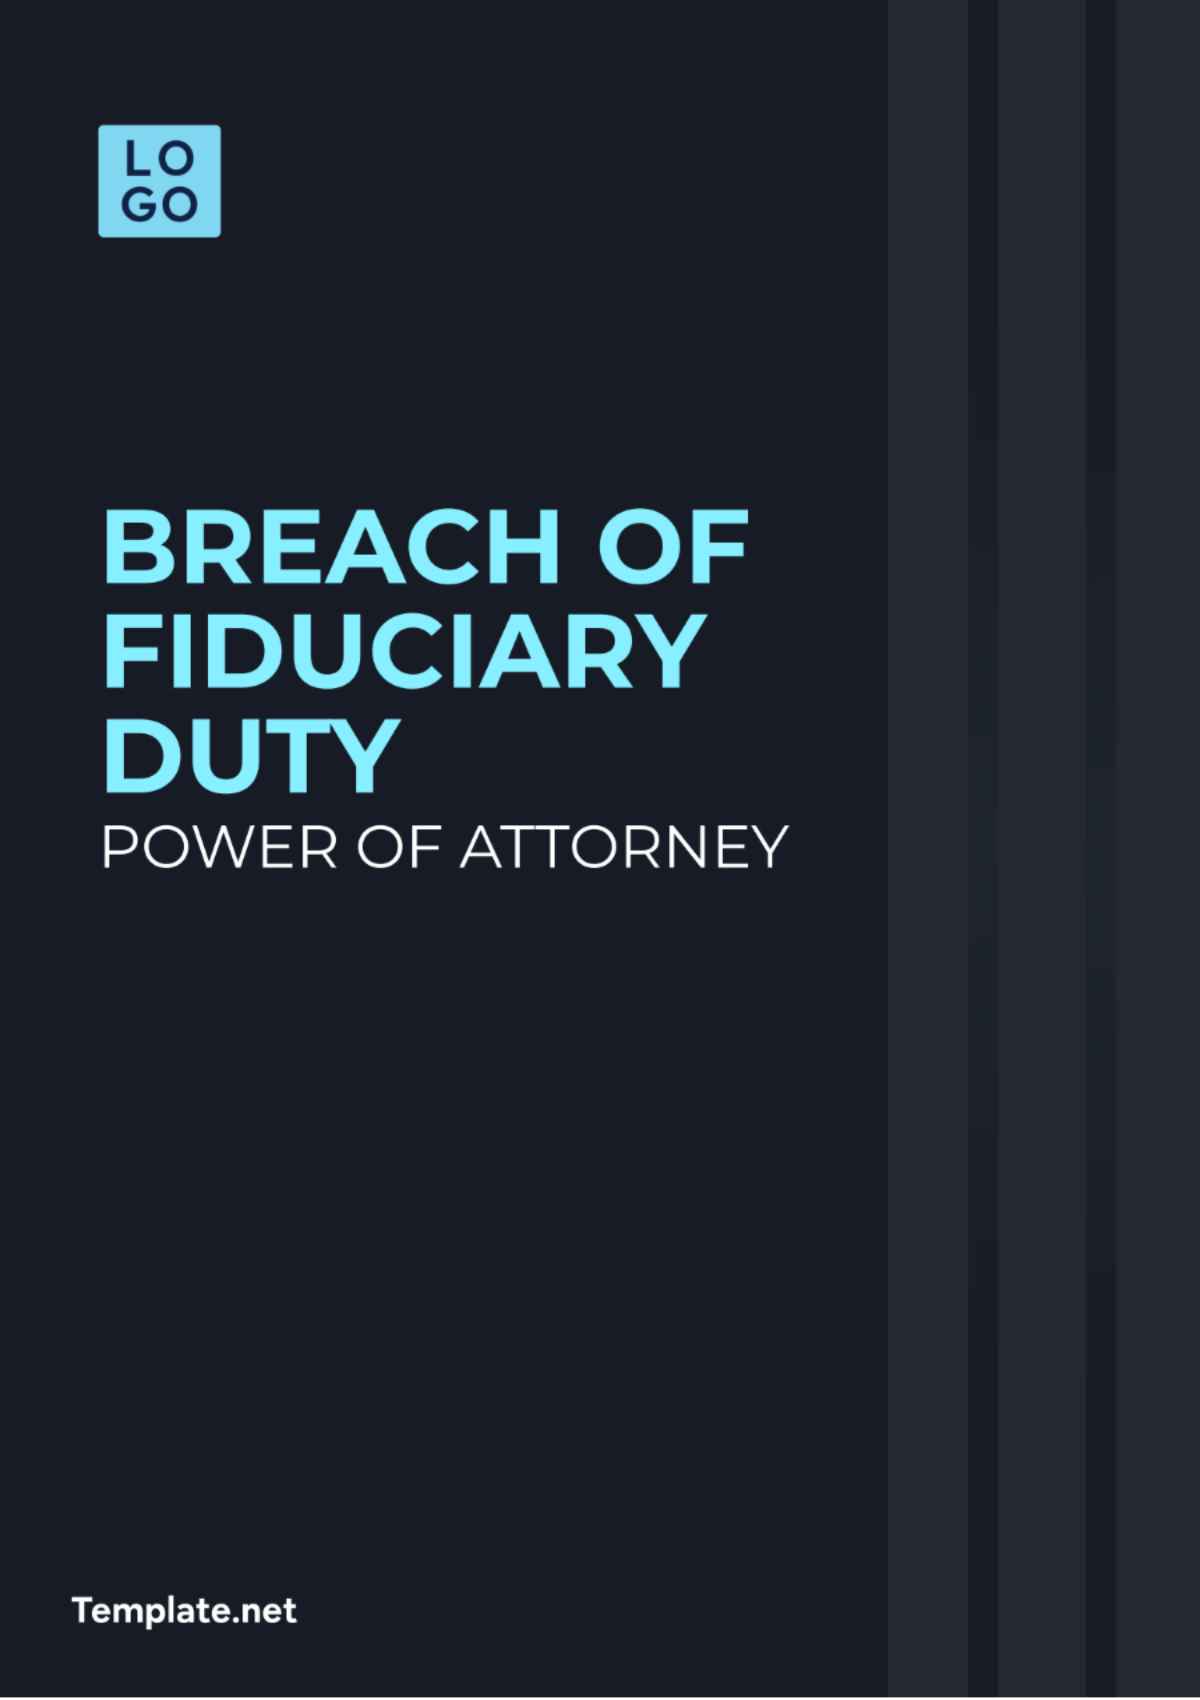 Breach Of Fiduciary Duty Power of Attorney Template